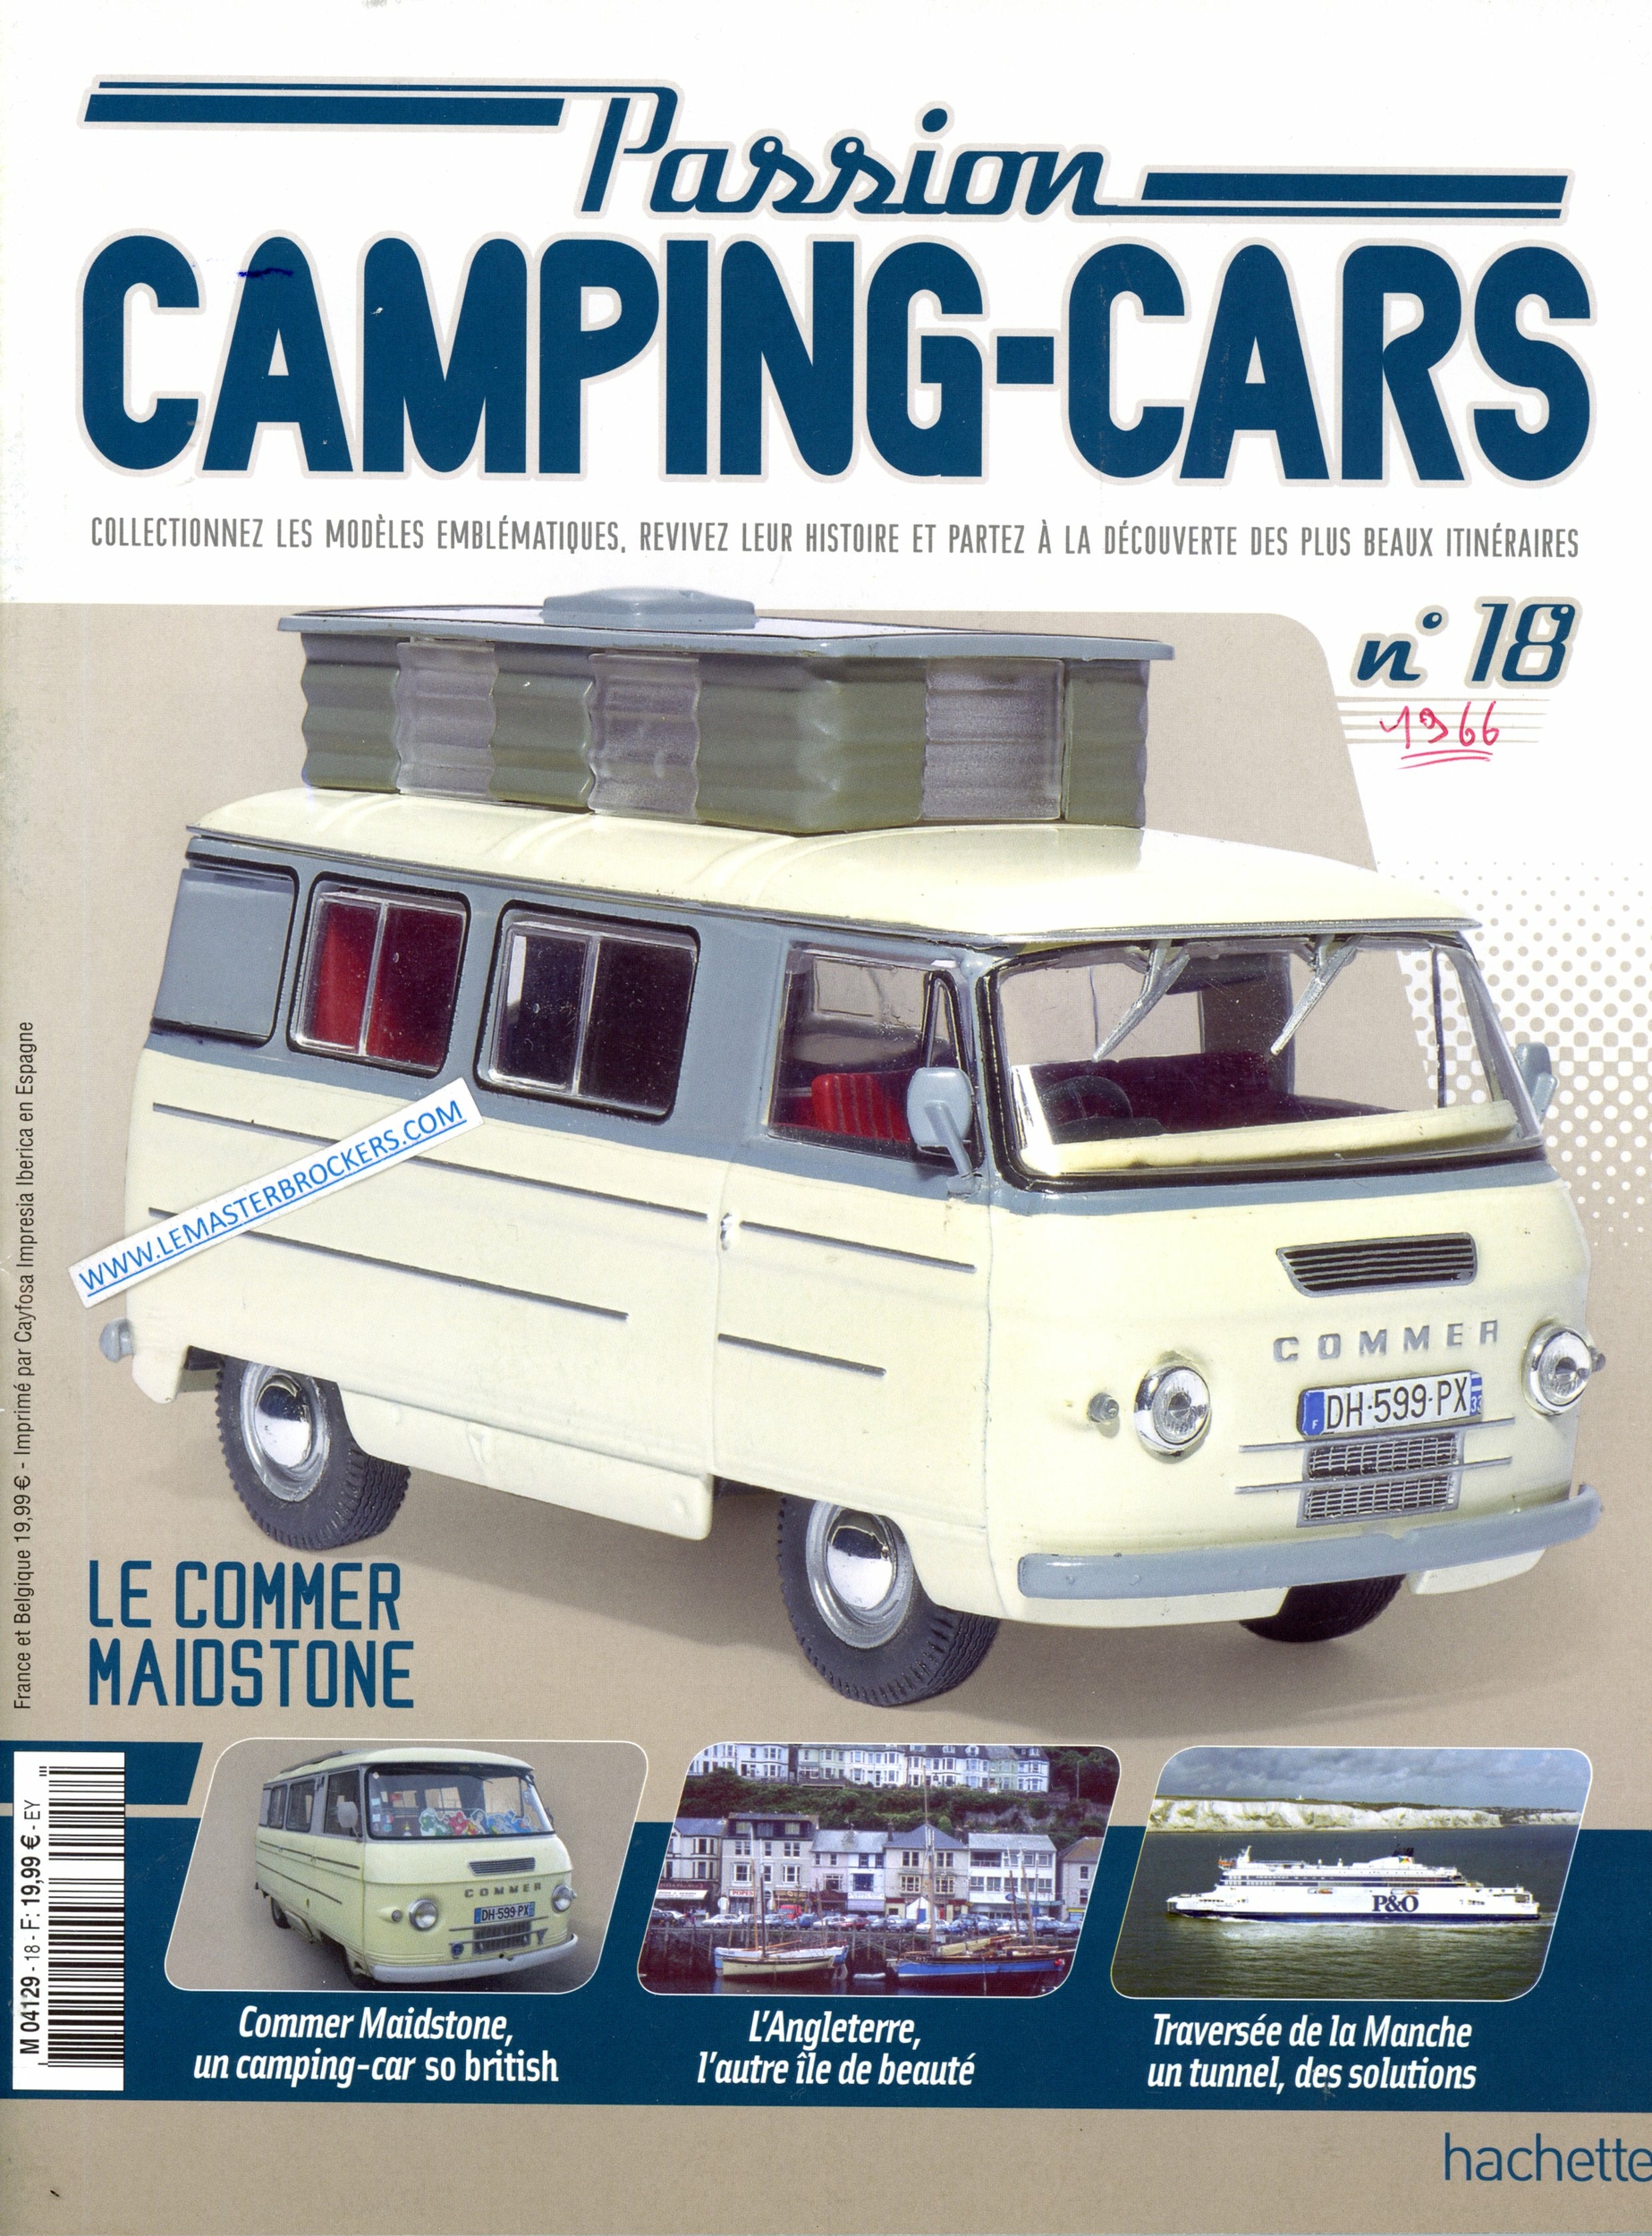 PASSION CAMPING-CARS COMMER MAIDSTONE